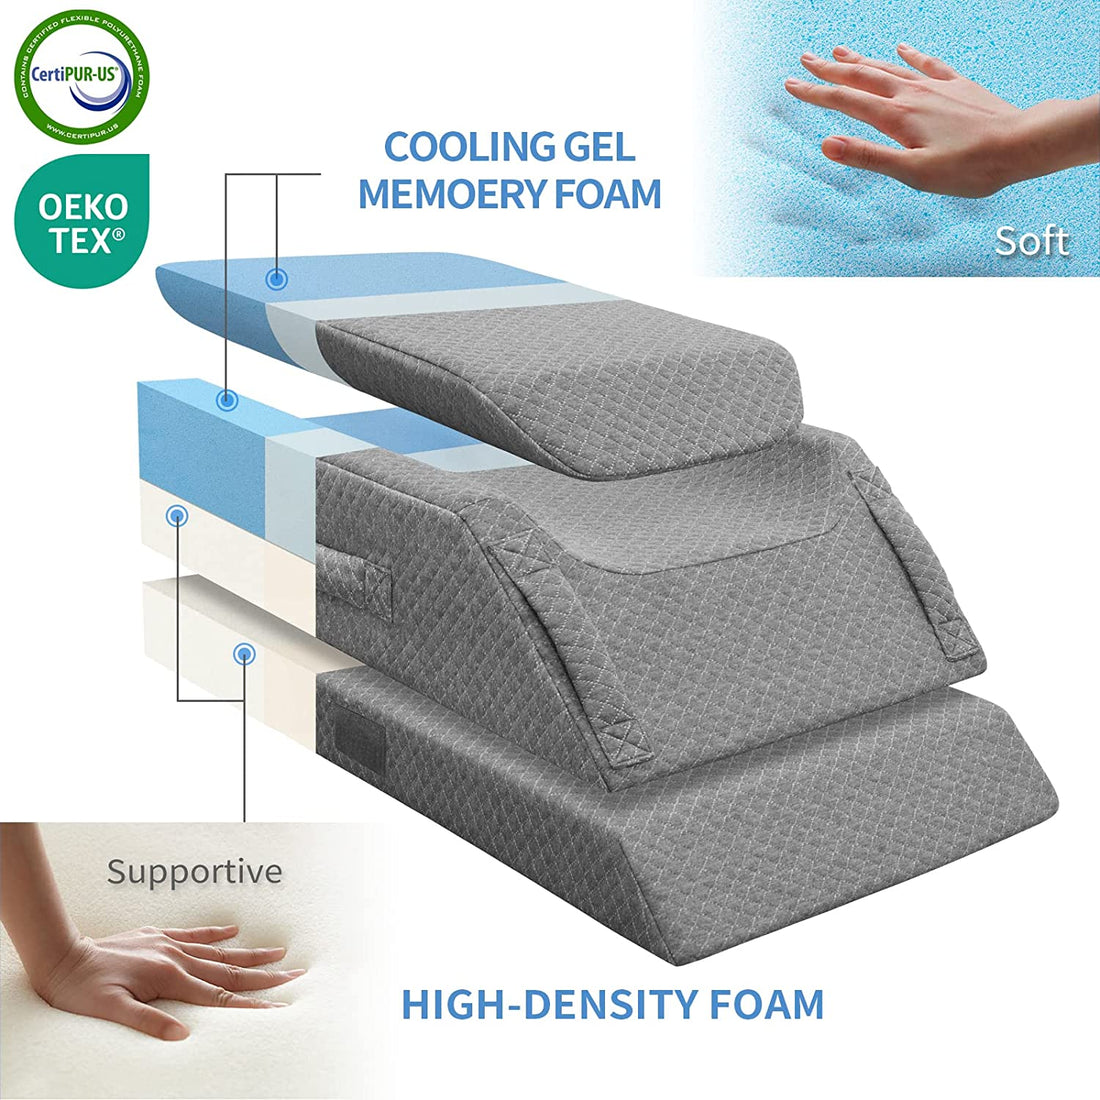 KingPavonini® Cooling Knee Pillow for Side Sleepers